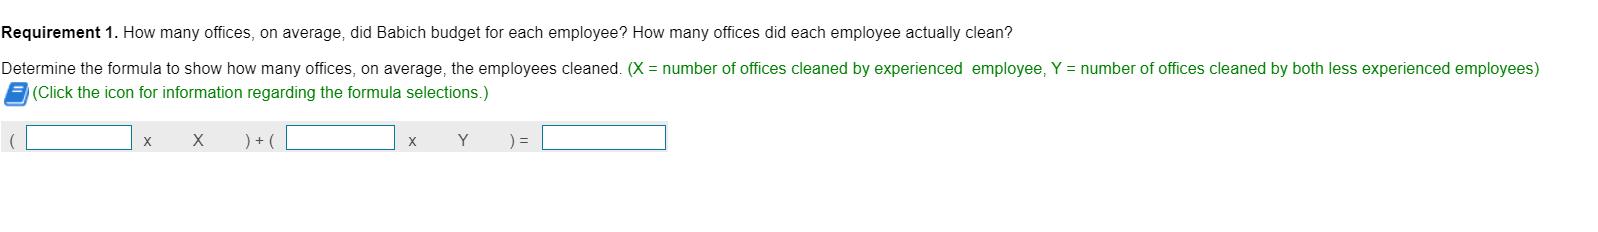 Requirement 1. How many offices, on average, did Babich budget for each employee? How many offices did each employee actually